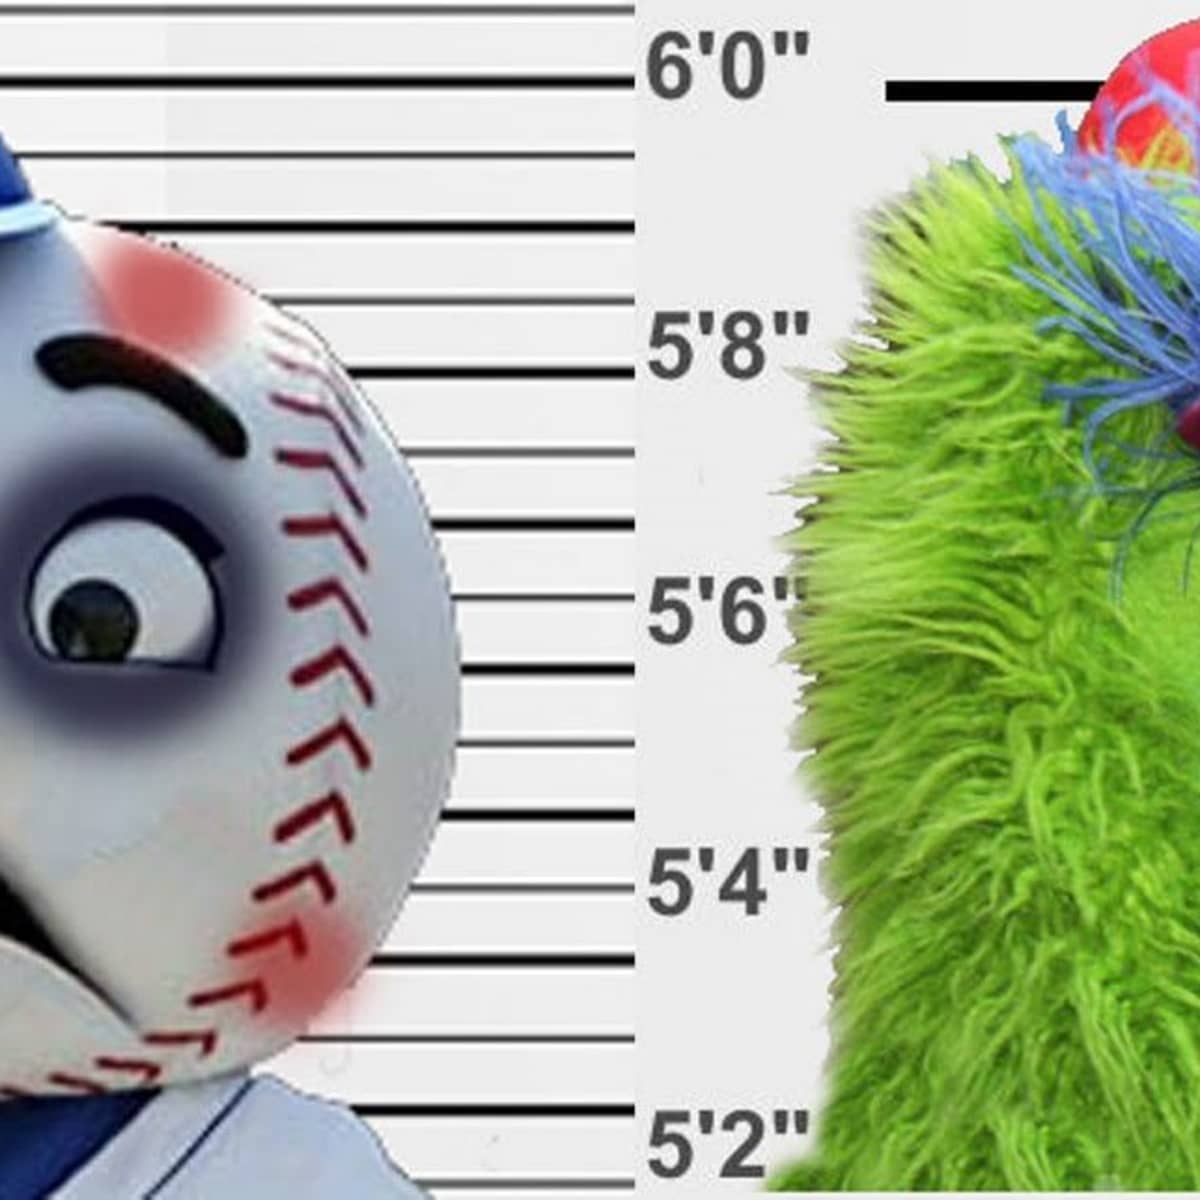 AI reimagined all 30 MLB mascots, and the results are interesting